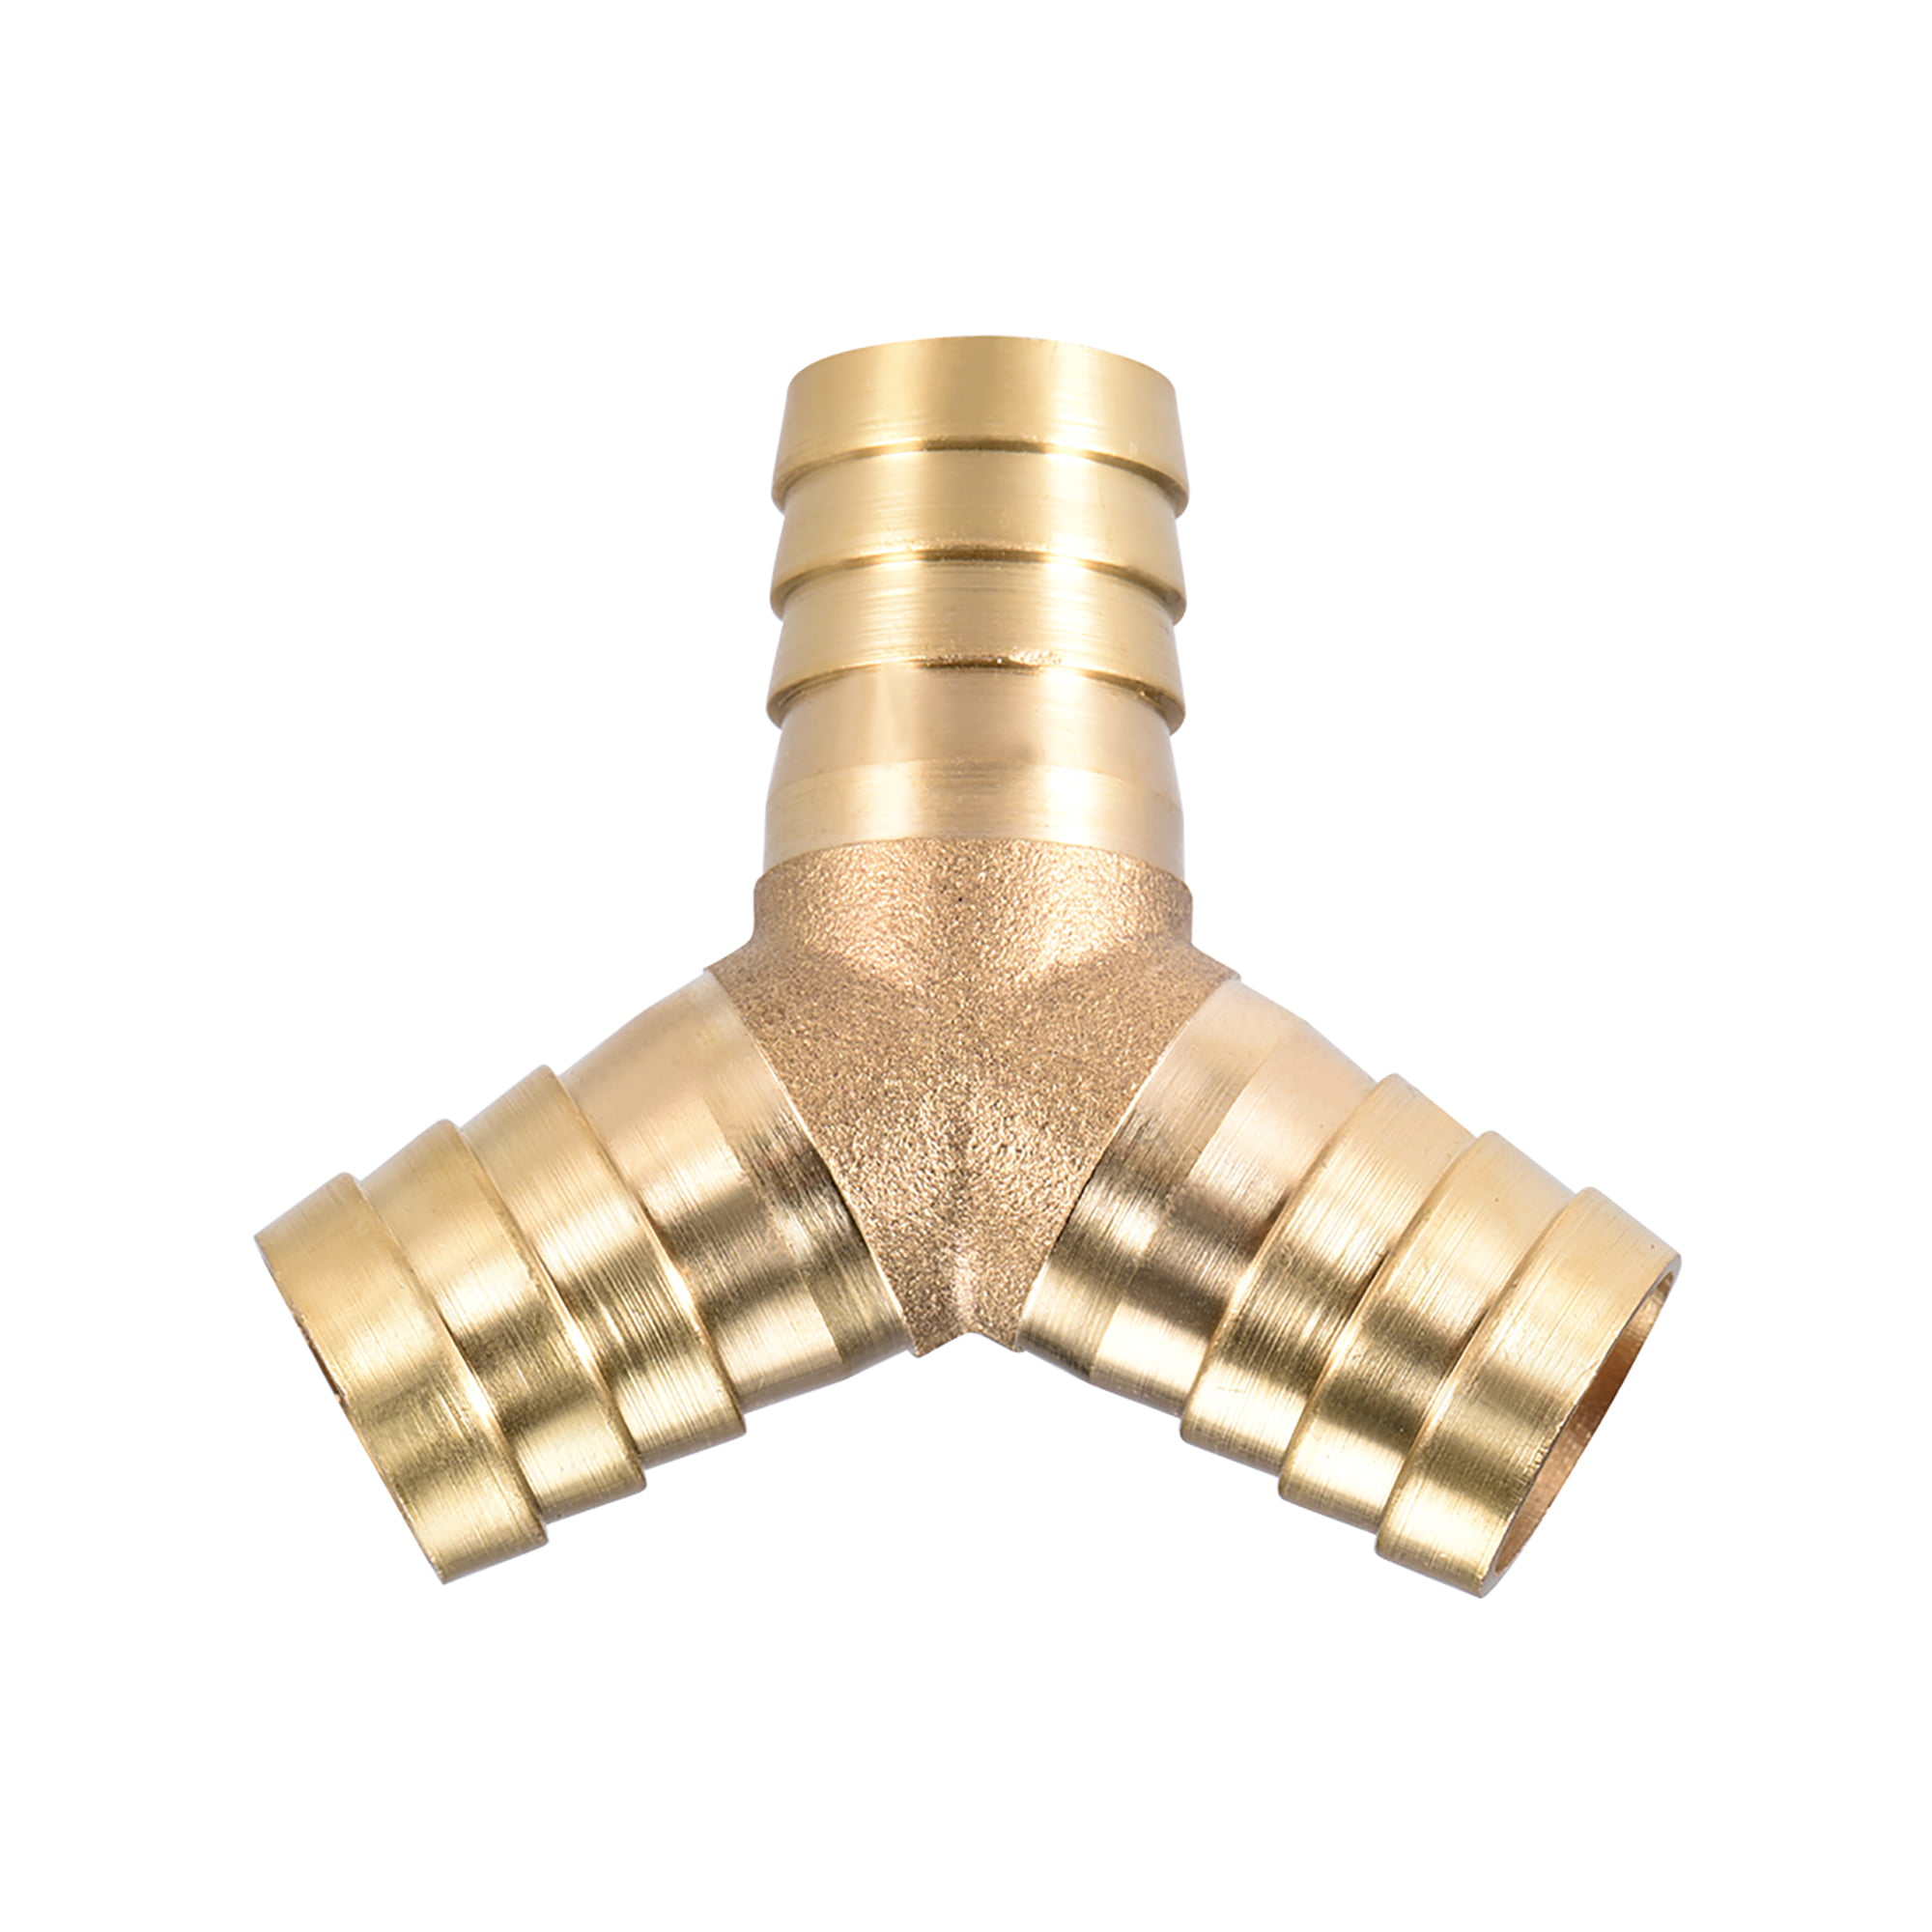 3 Pcs Barb Tee 5/8" x 5/8" x 5/8" Hose Barbed Y Fitting Brass 3 Way Union 